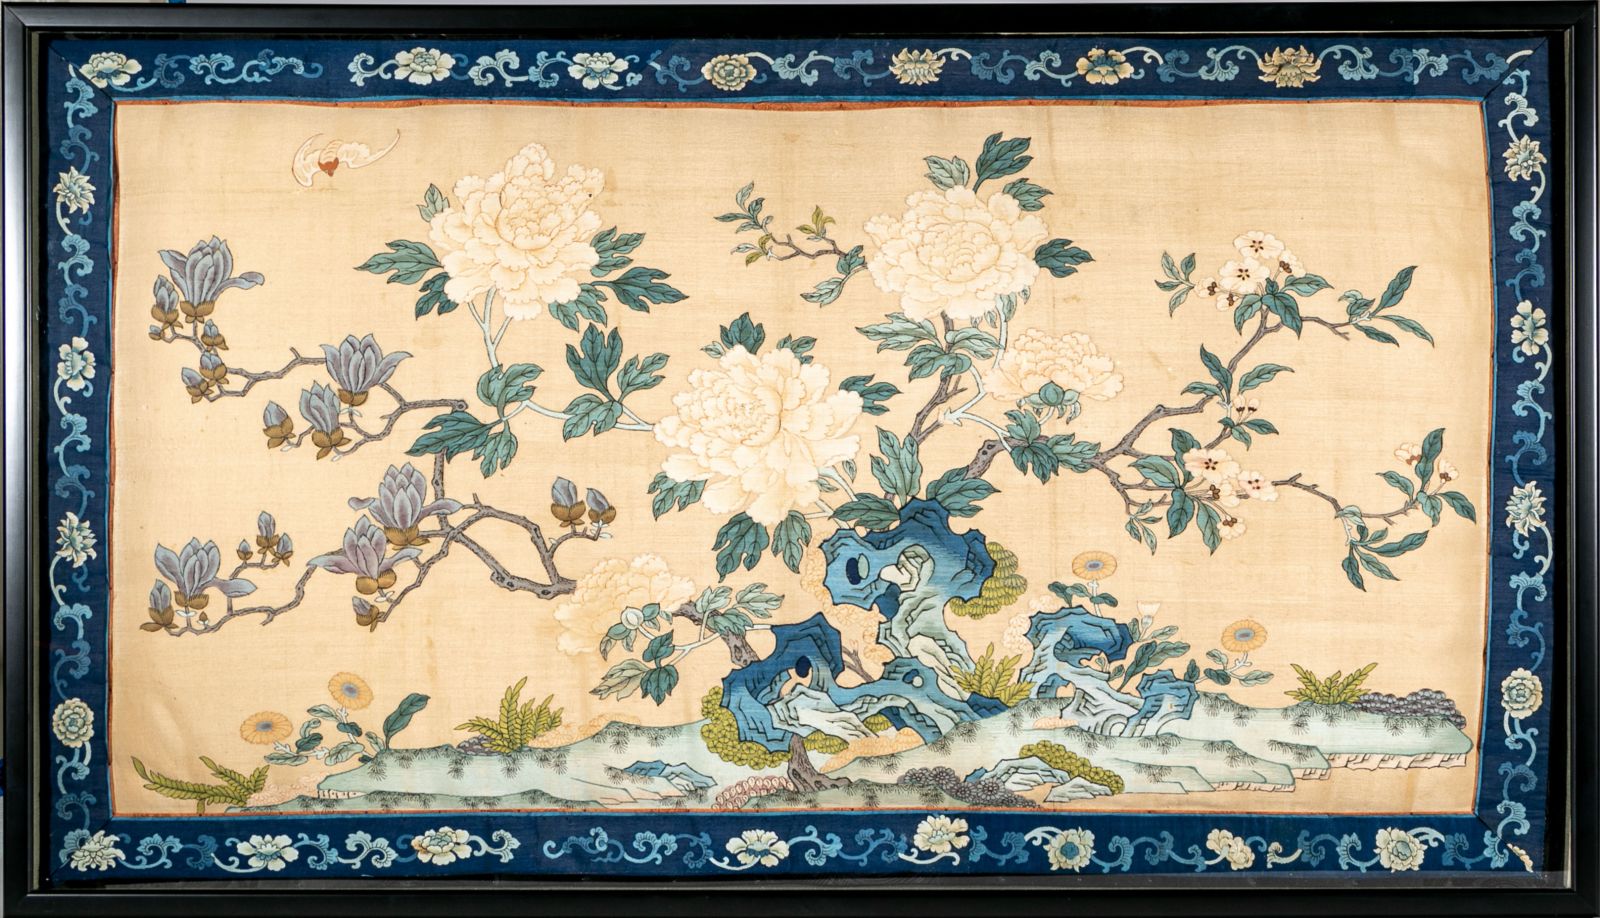 The Estate & Lifetime Collection of Barbara J. Paul: Extraordinary Chinese Qing Dynasty Woven Textile